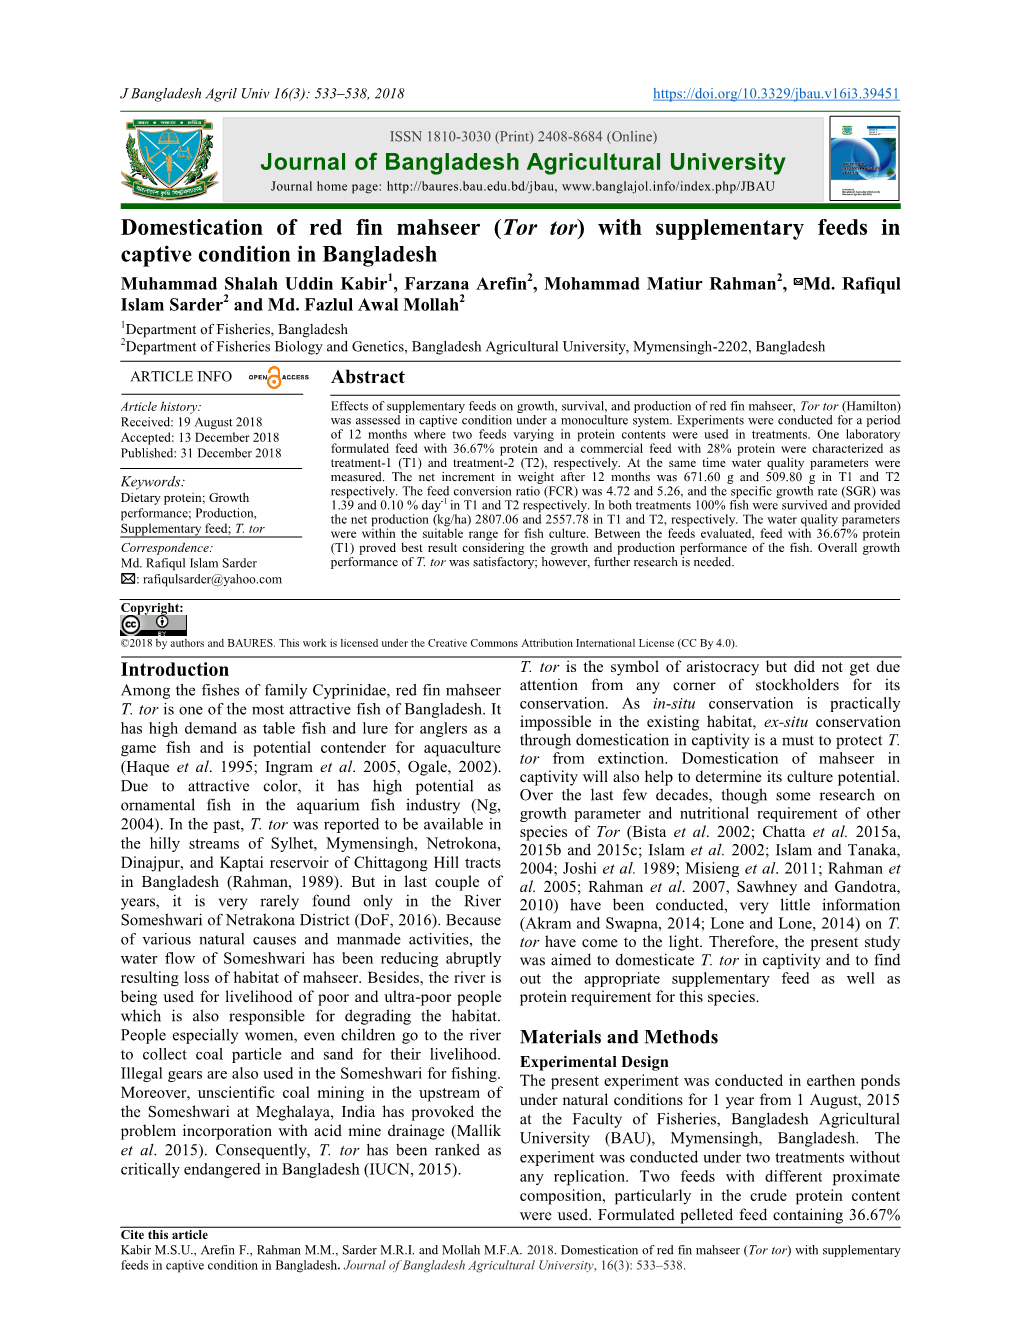 Allelopathic Potential of Mustard Crop Residues on Weed Management and Performance of Transplant Aman Rice